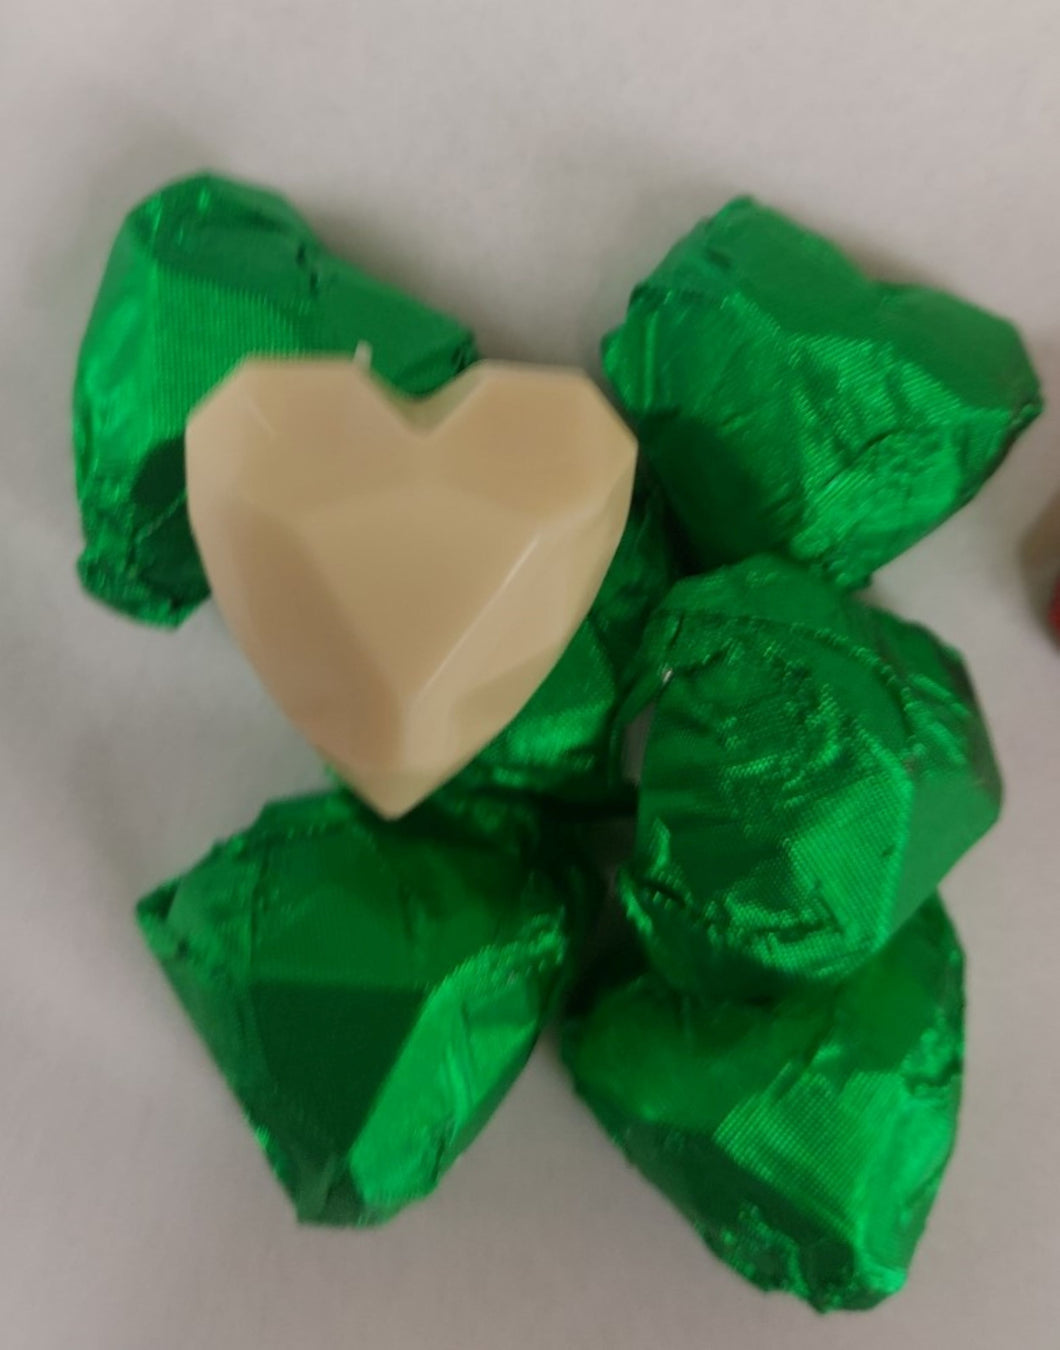 Belgian White Chocolate Geometrical Hearts Foil Wrapped Wedding & Party Favours